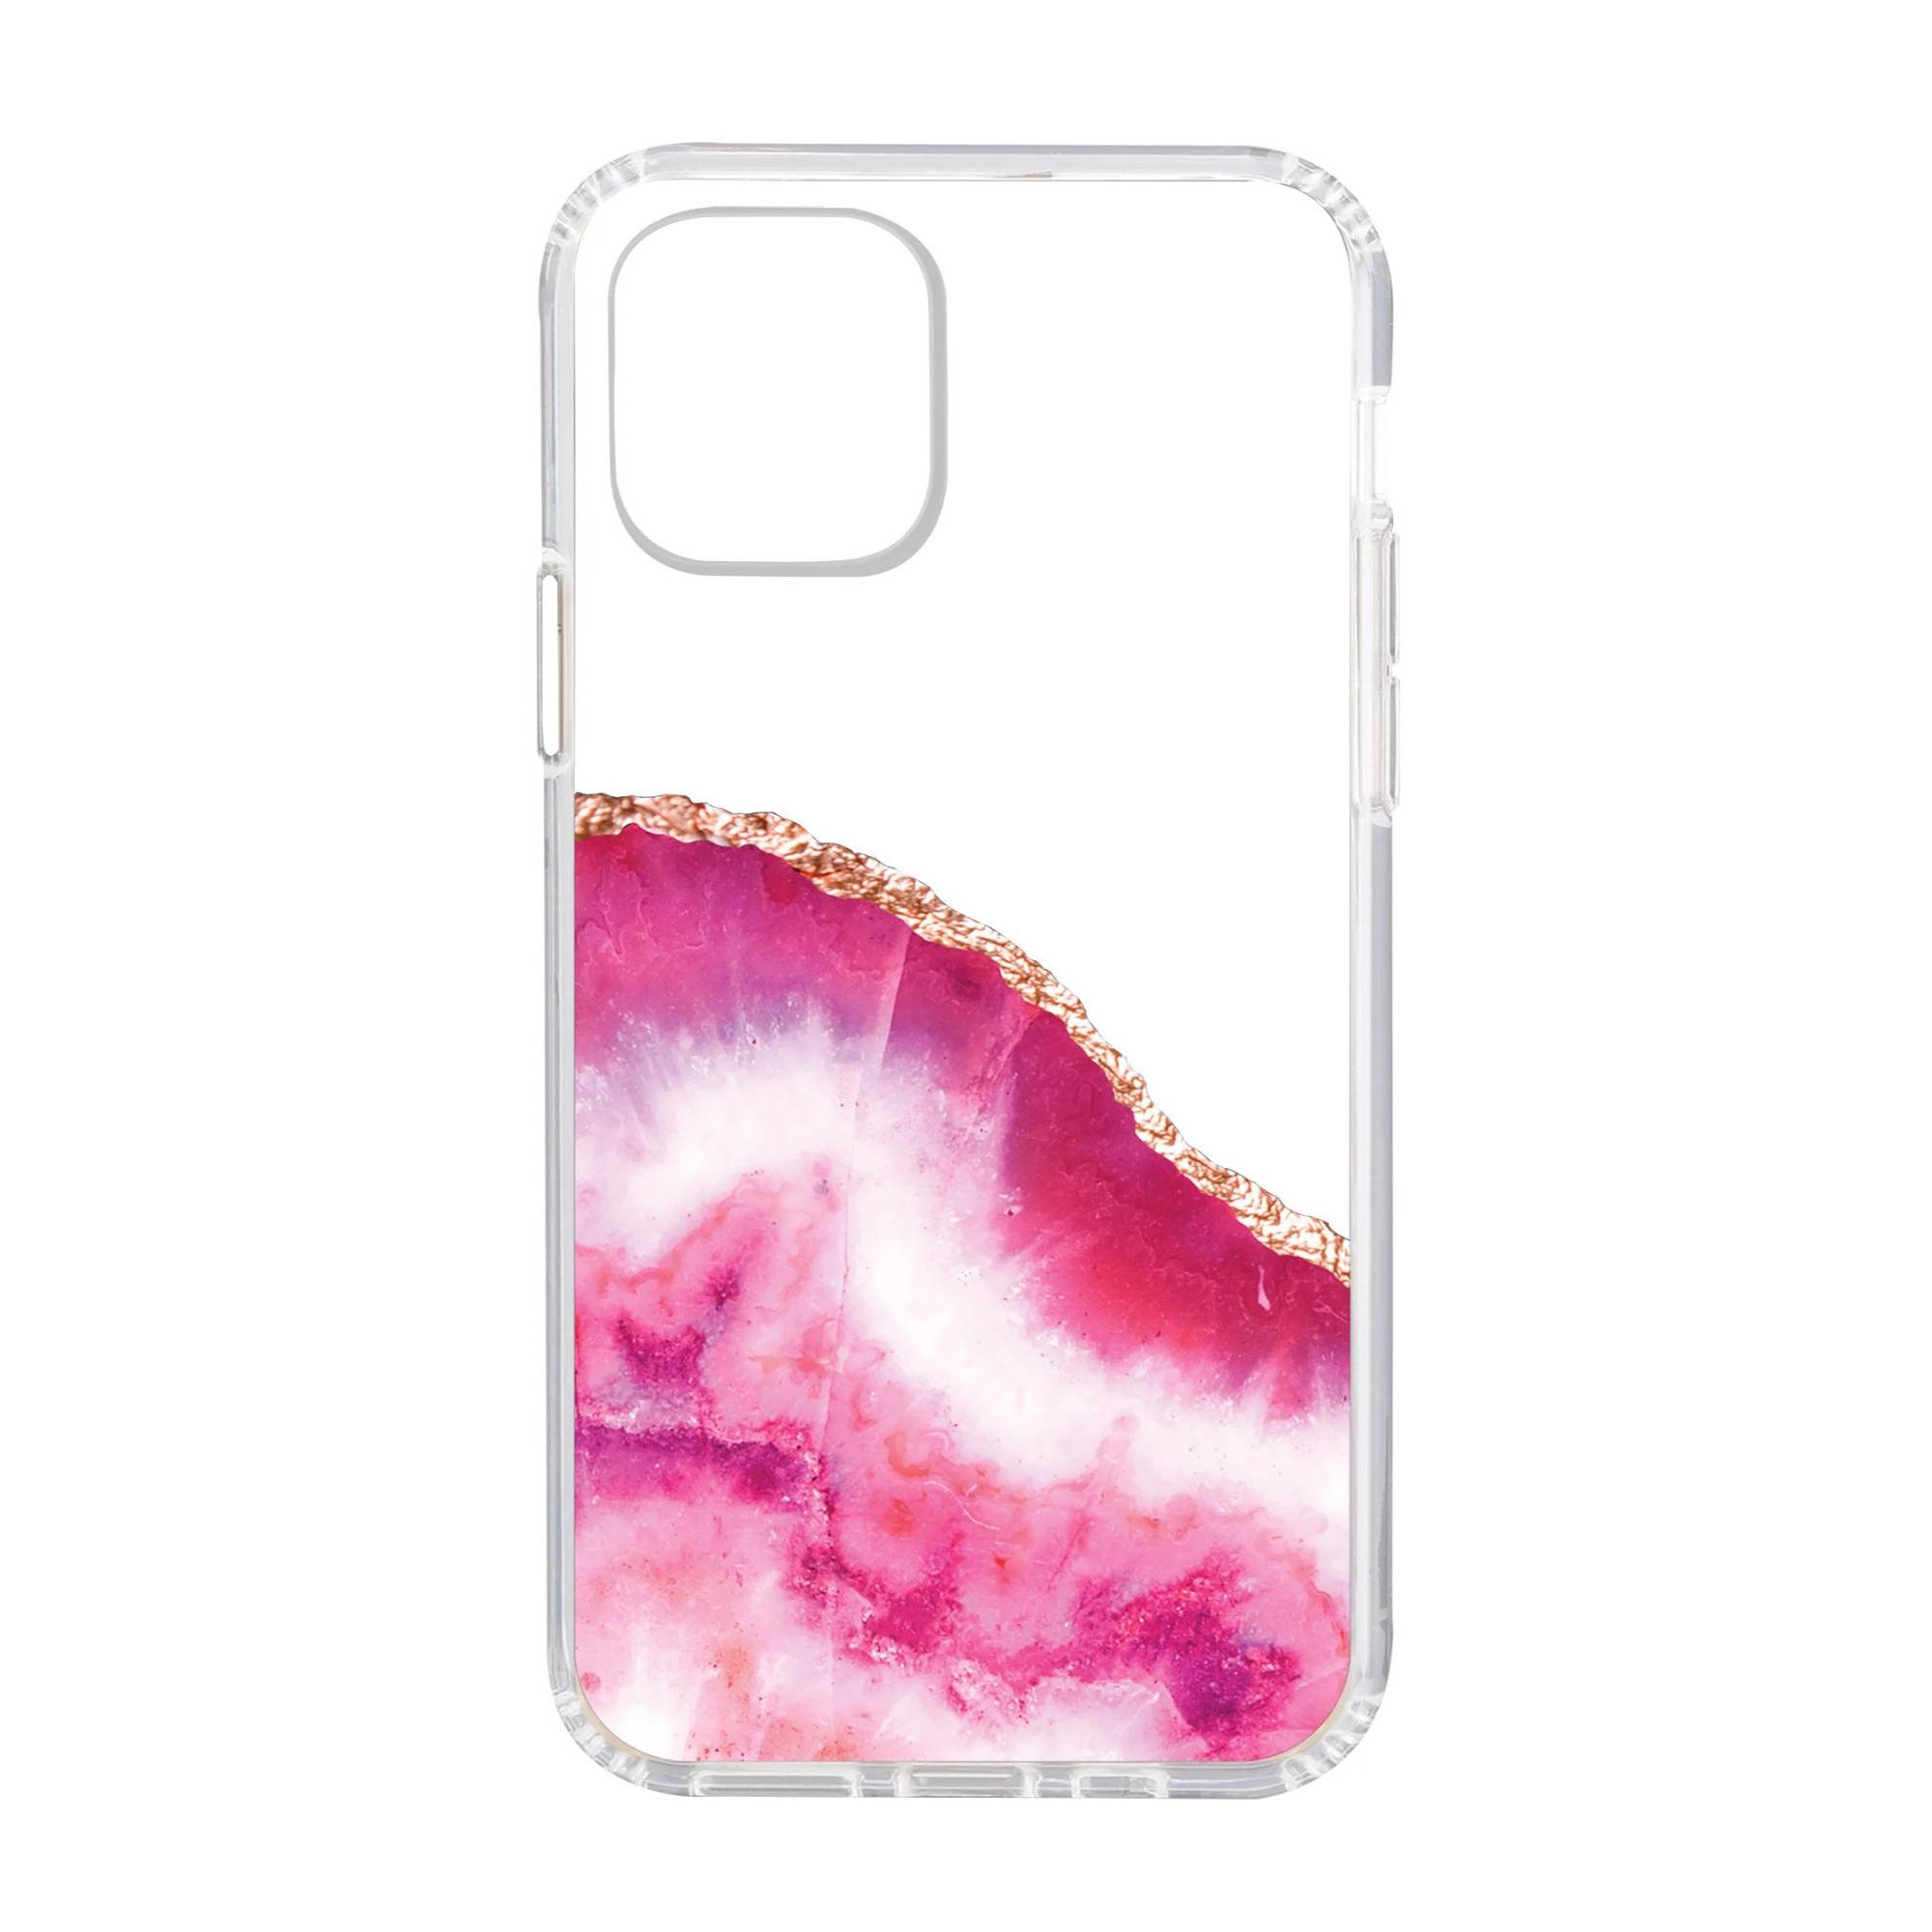 Ellie Los Angeles Love Ellie Pink and White Agate Phone Case for iPhone 12 Mini